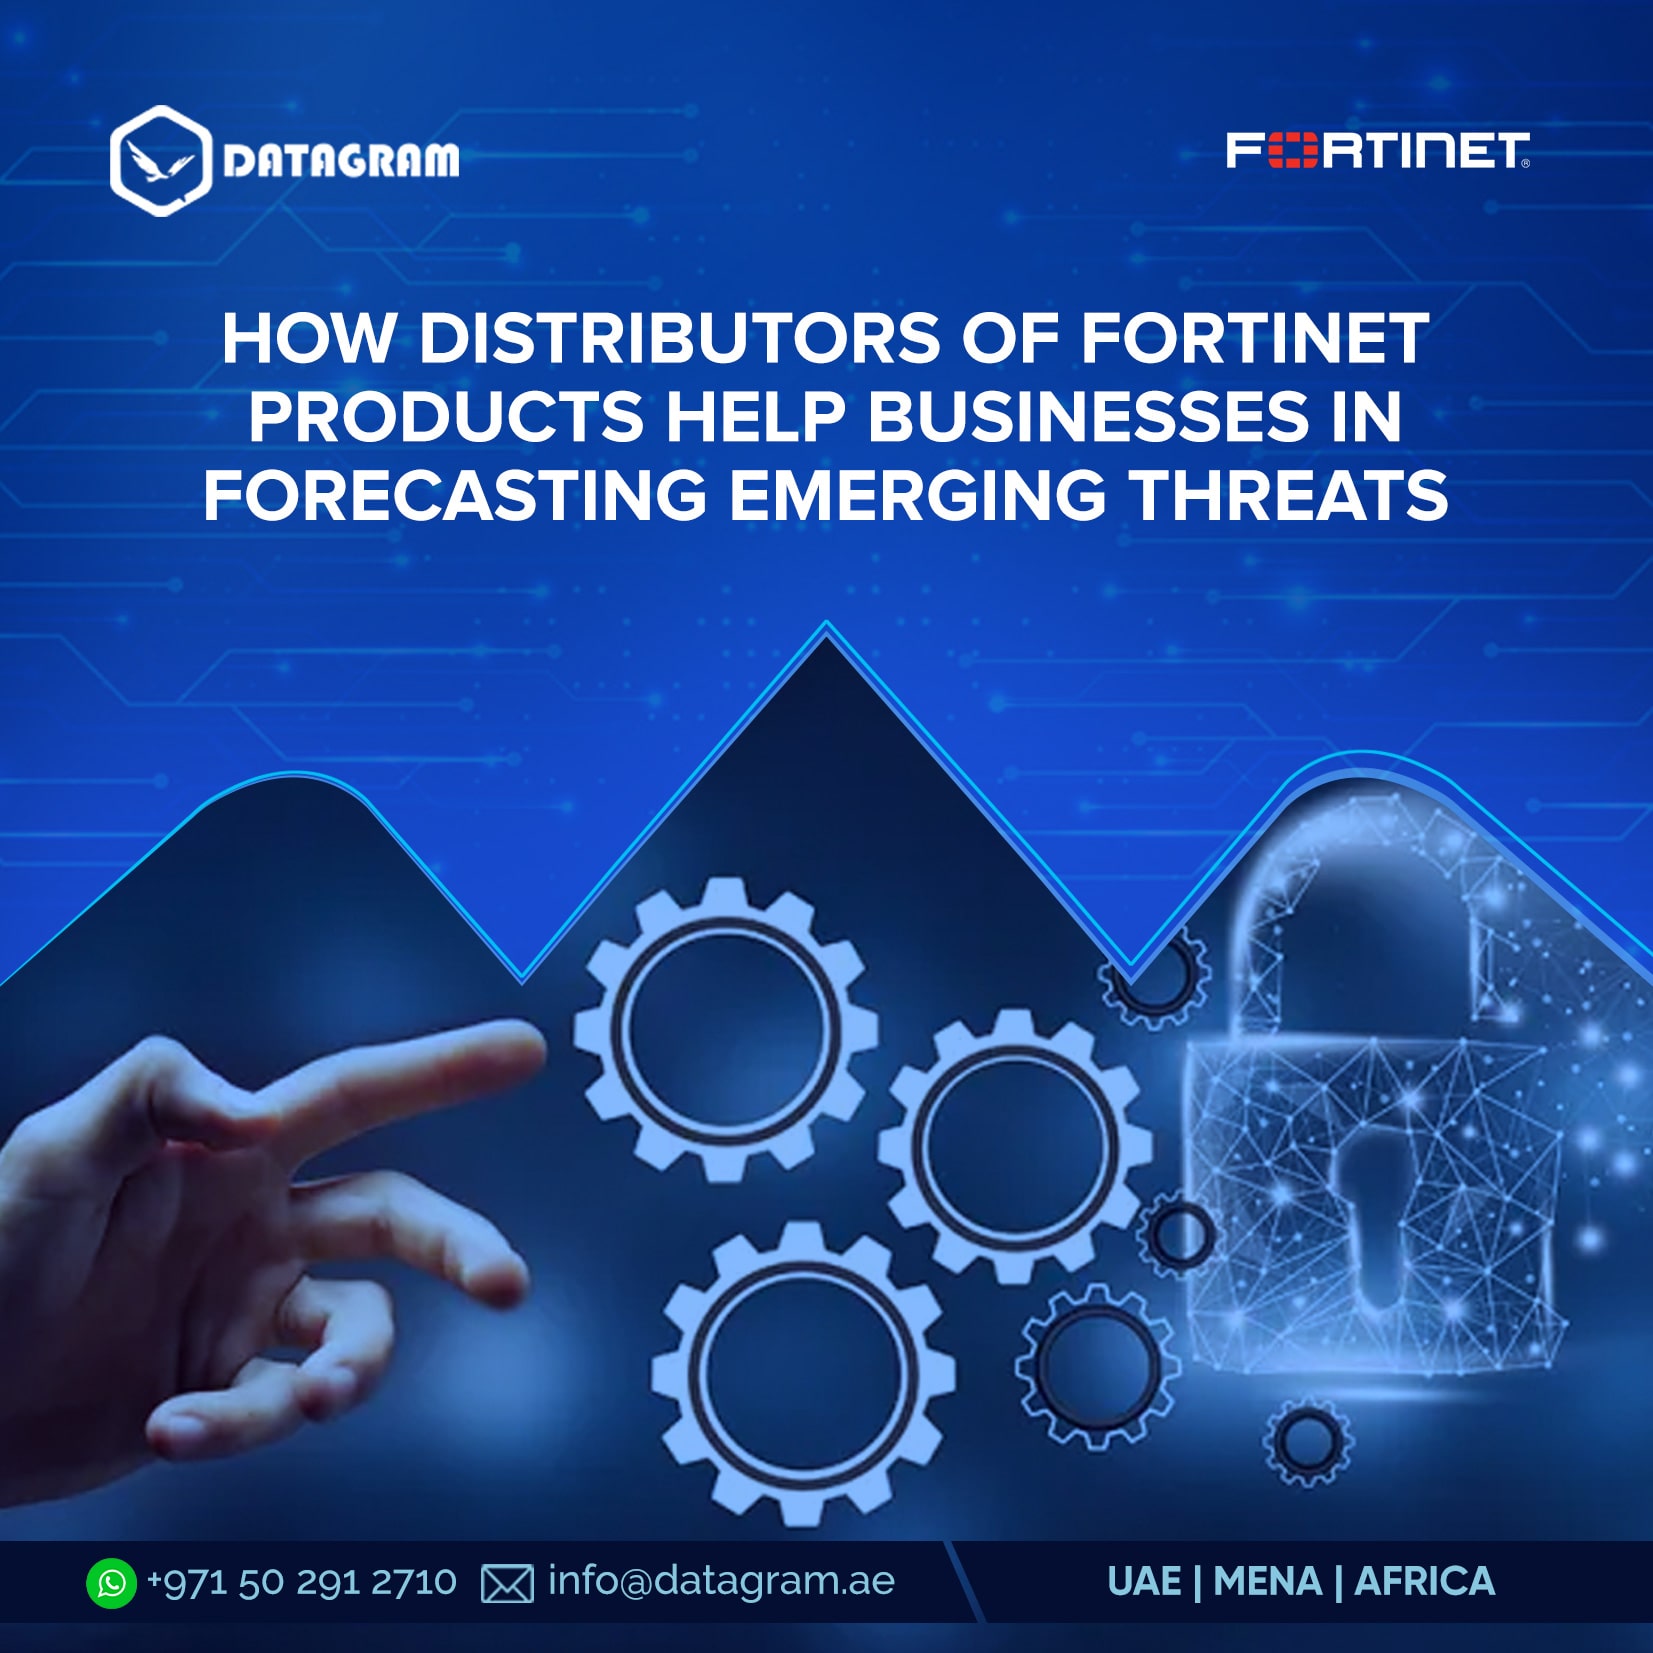 How Distributors of Fortinet Products Help Businesses in Forecasting Emerging Threats